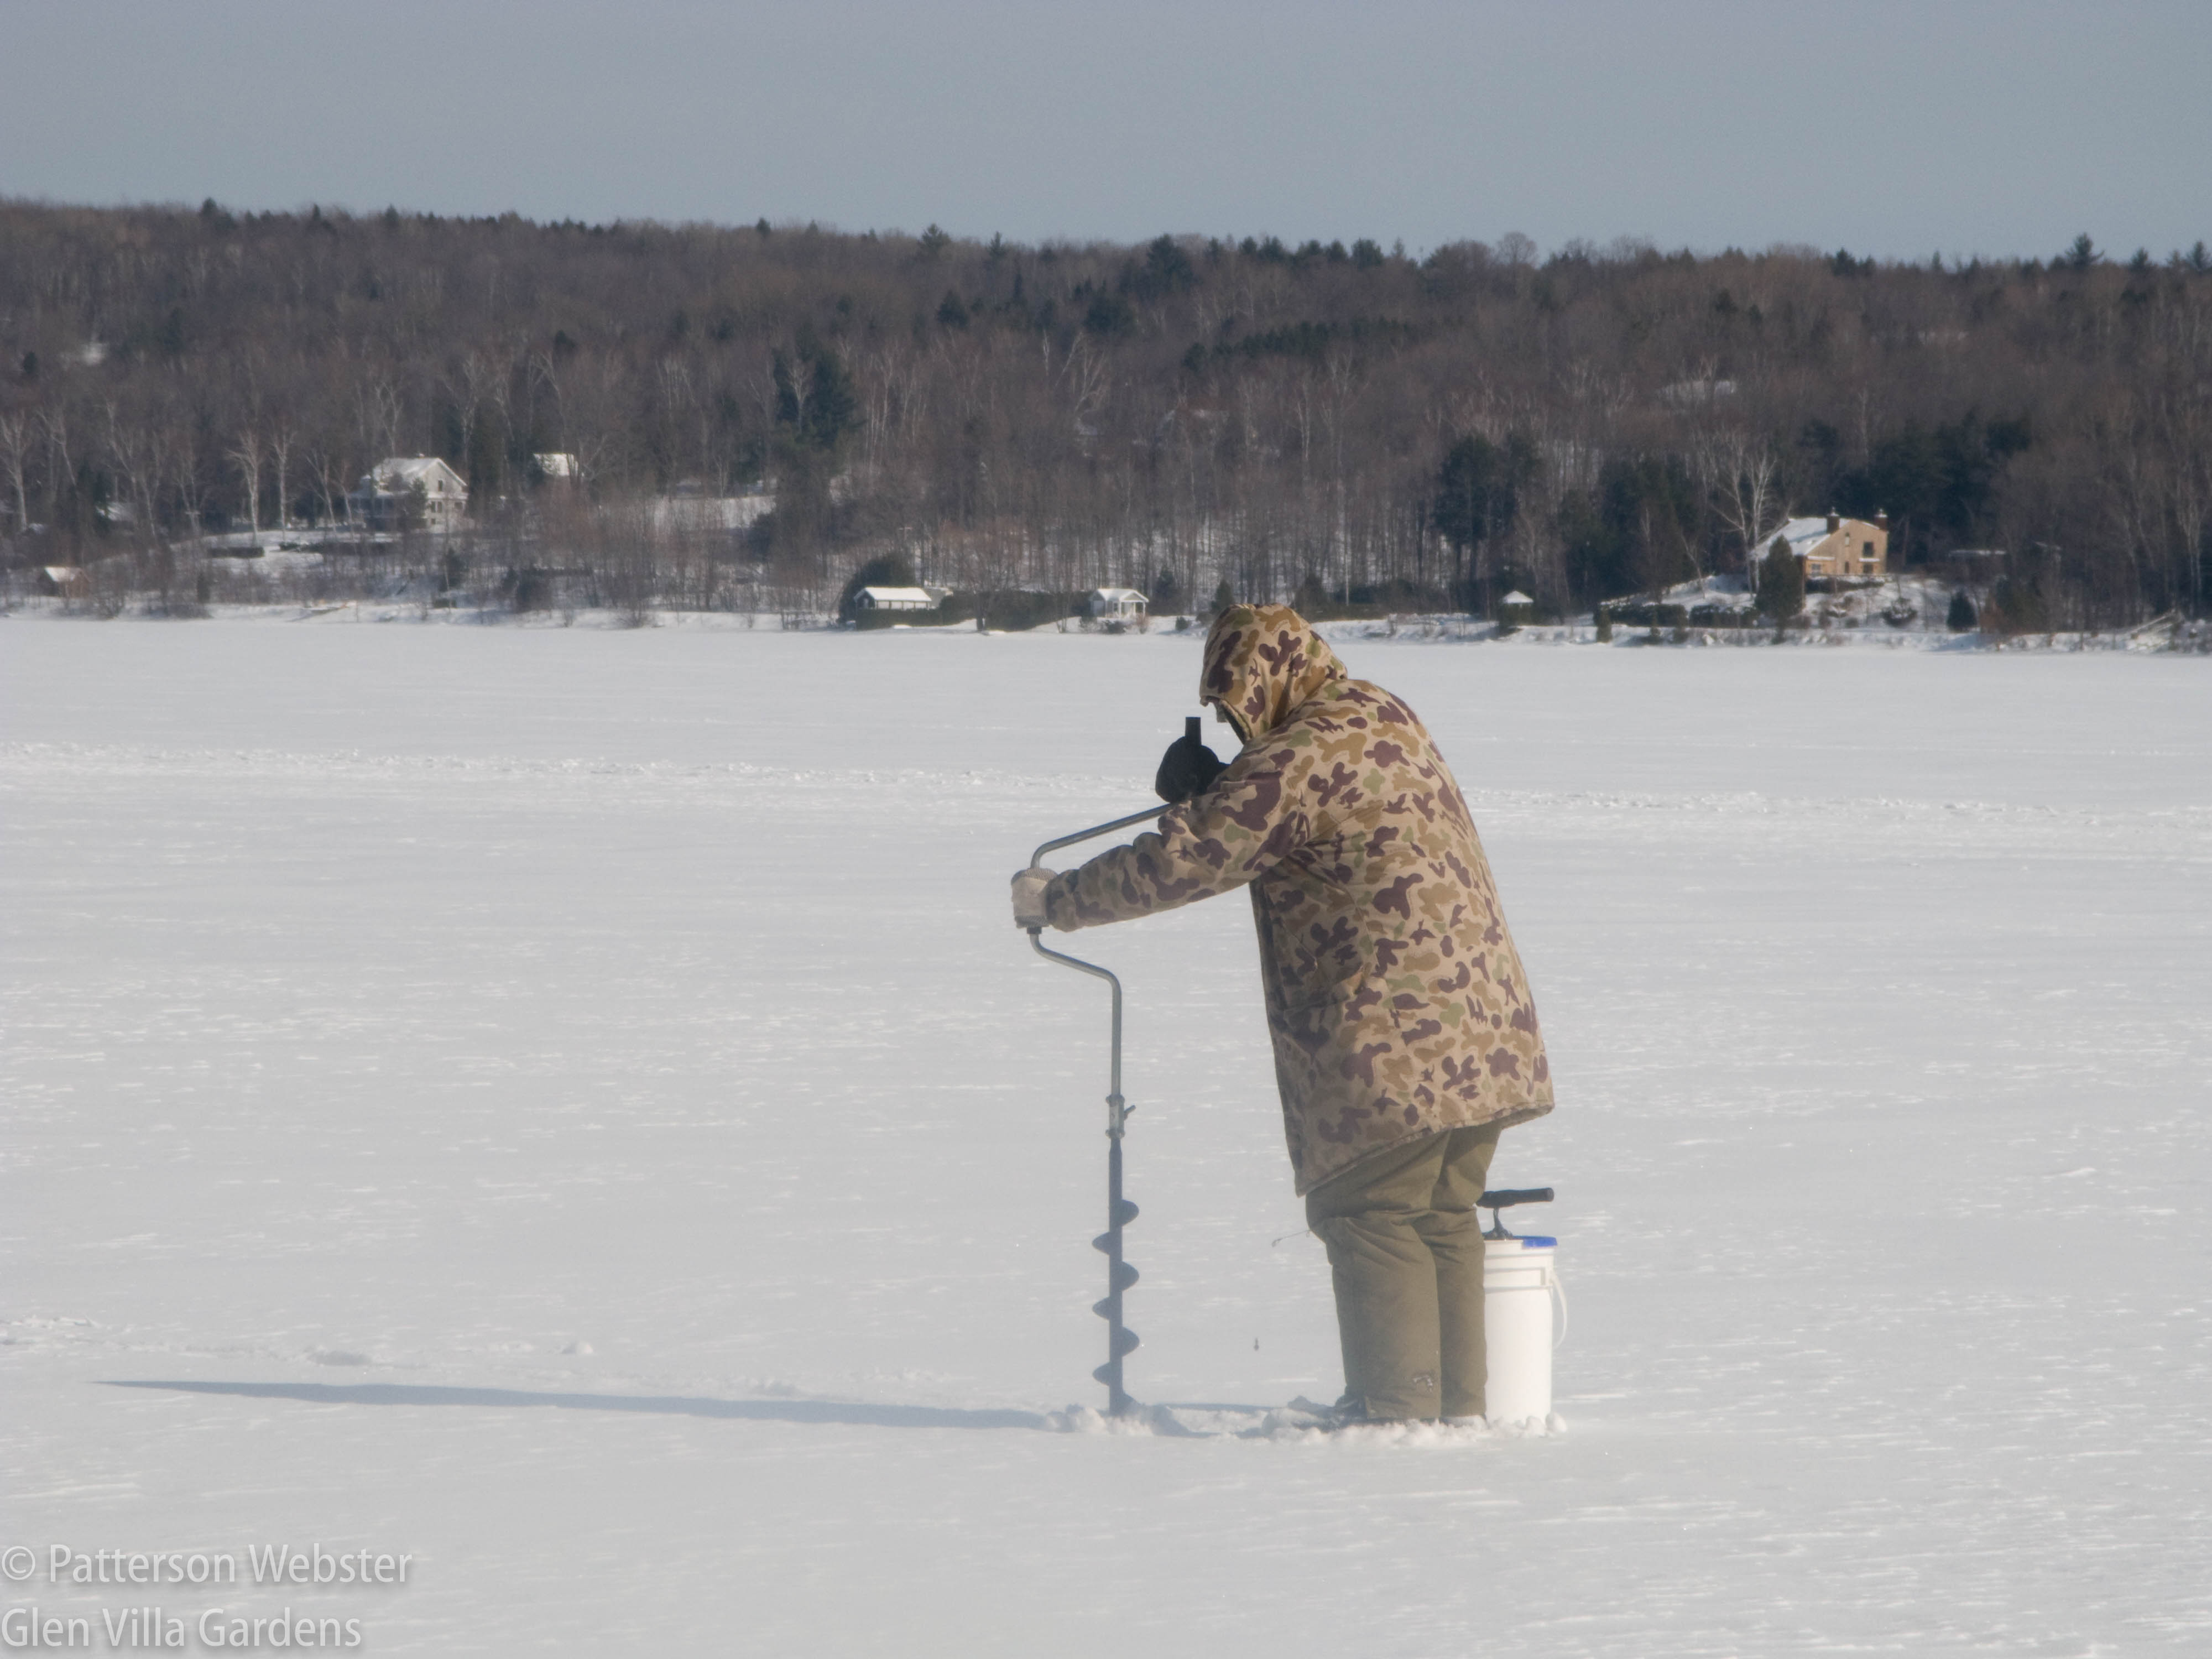 Ice fishing is most often a solitary activity. And a cold one -- this fisherman is well bundled up.